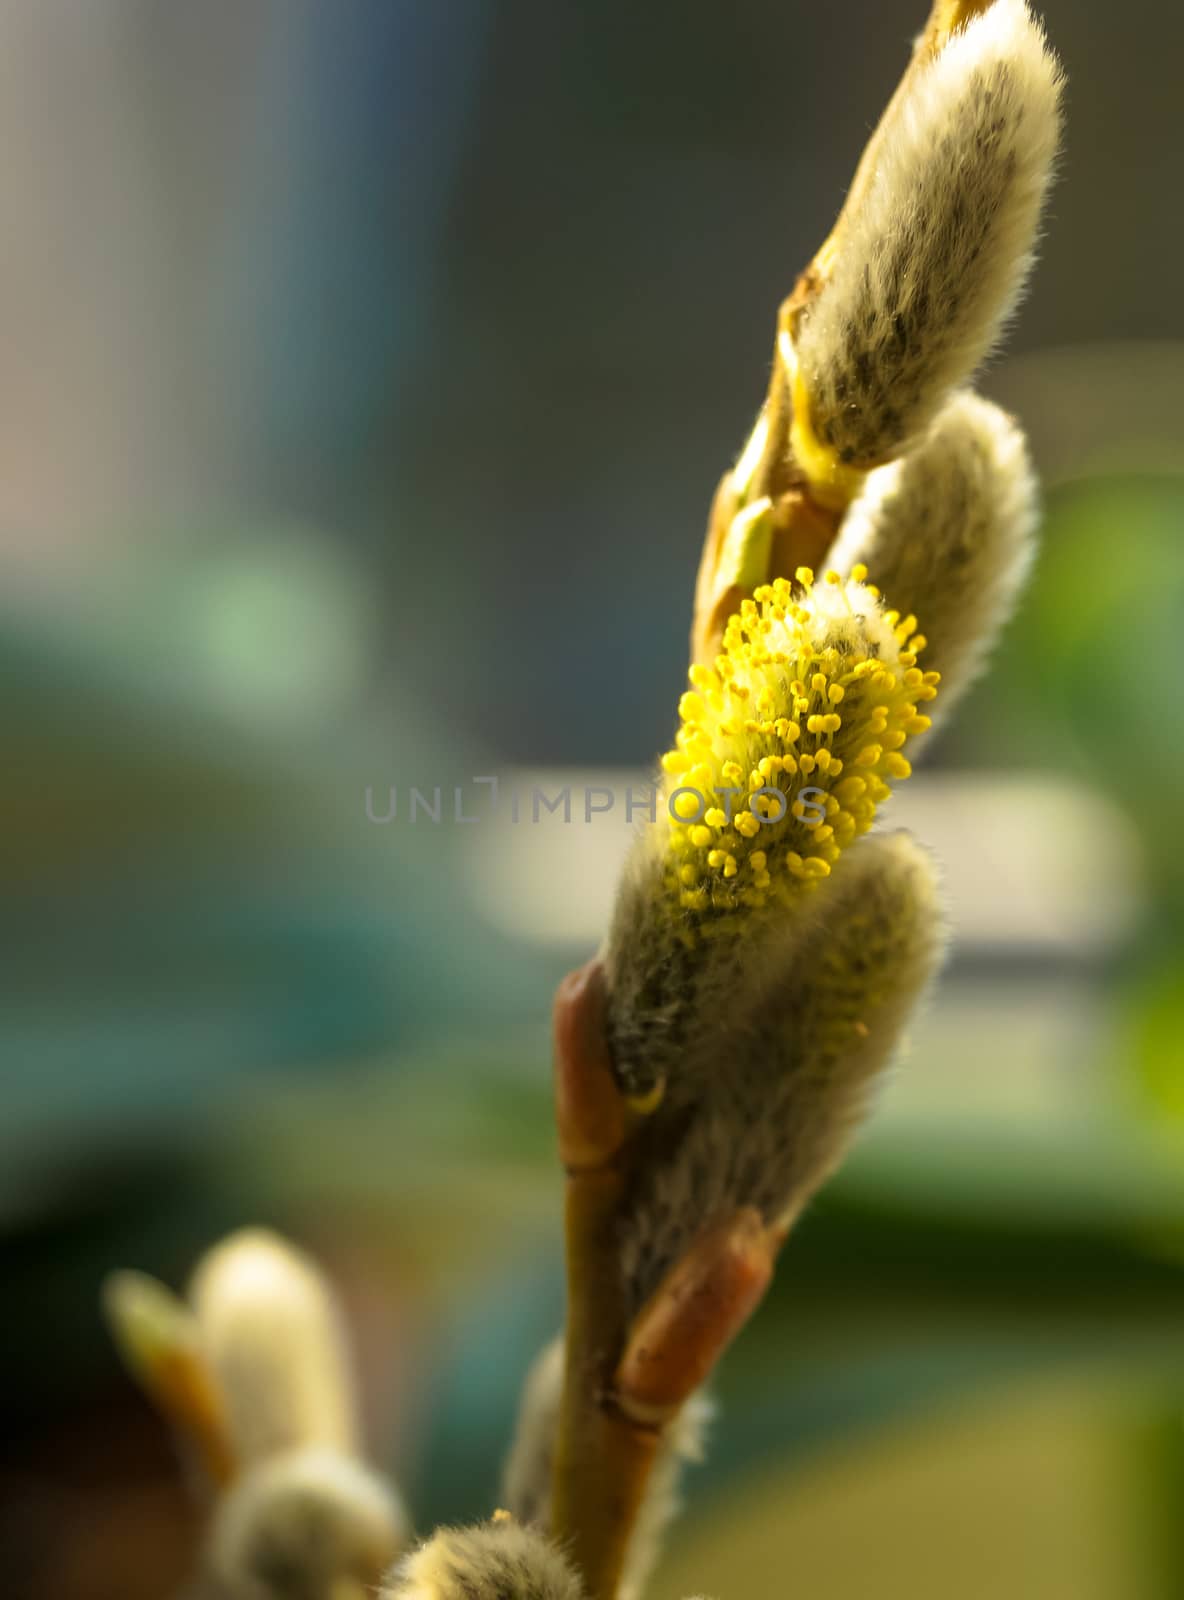 willow twig in bloom by Oleczka11